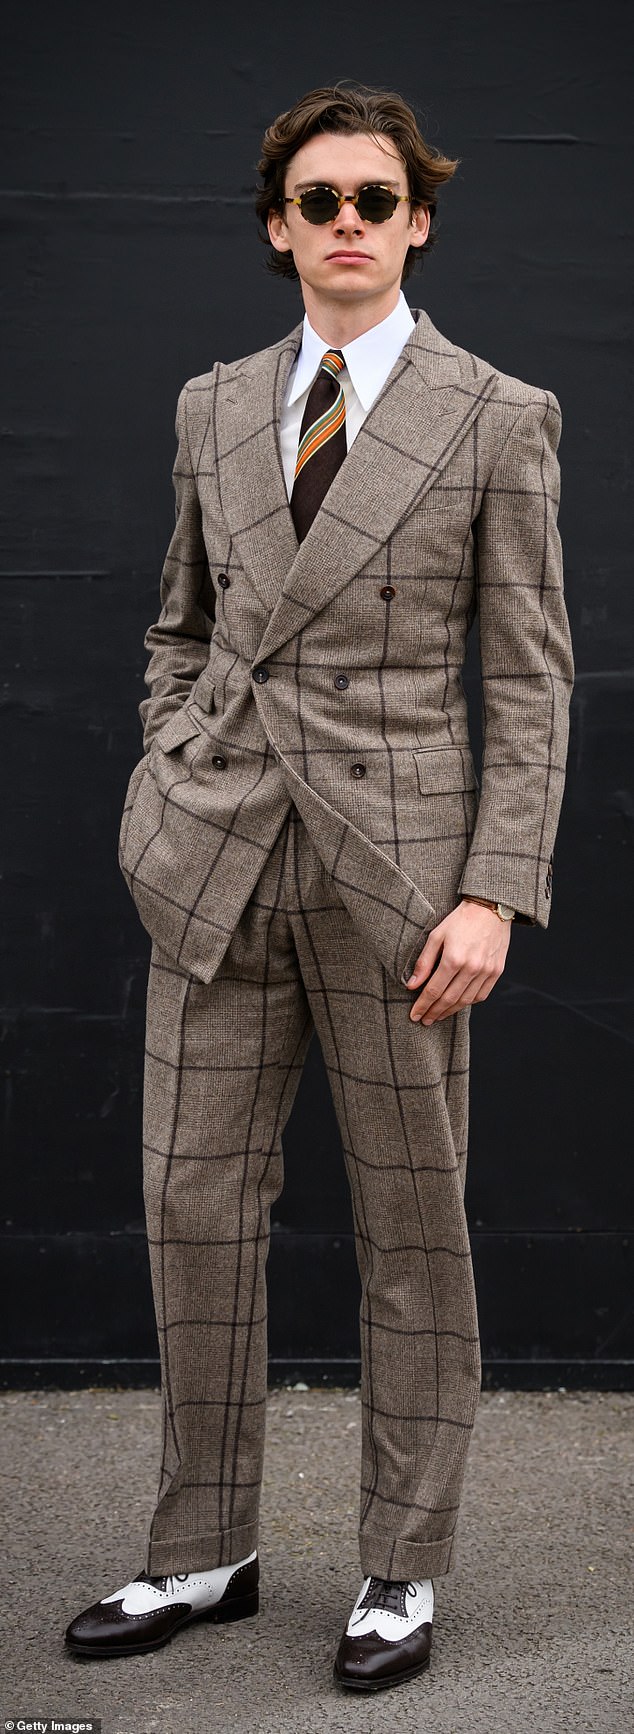 Mathias Le Fevre oozed style as he took part in the popular race, opting for monochrome polished shoes, a smart plaid suit and sunglasses